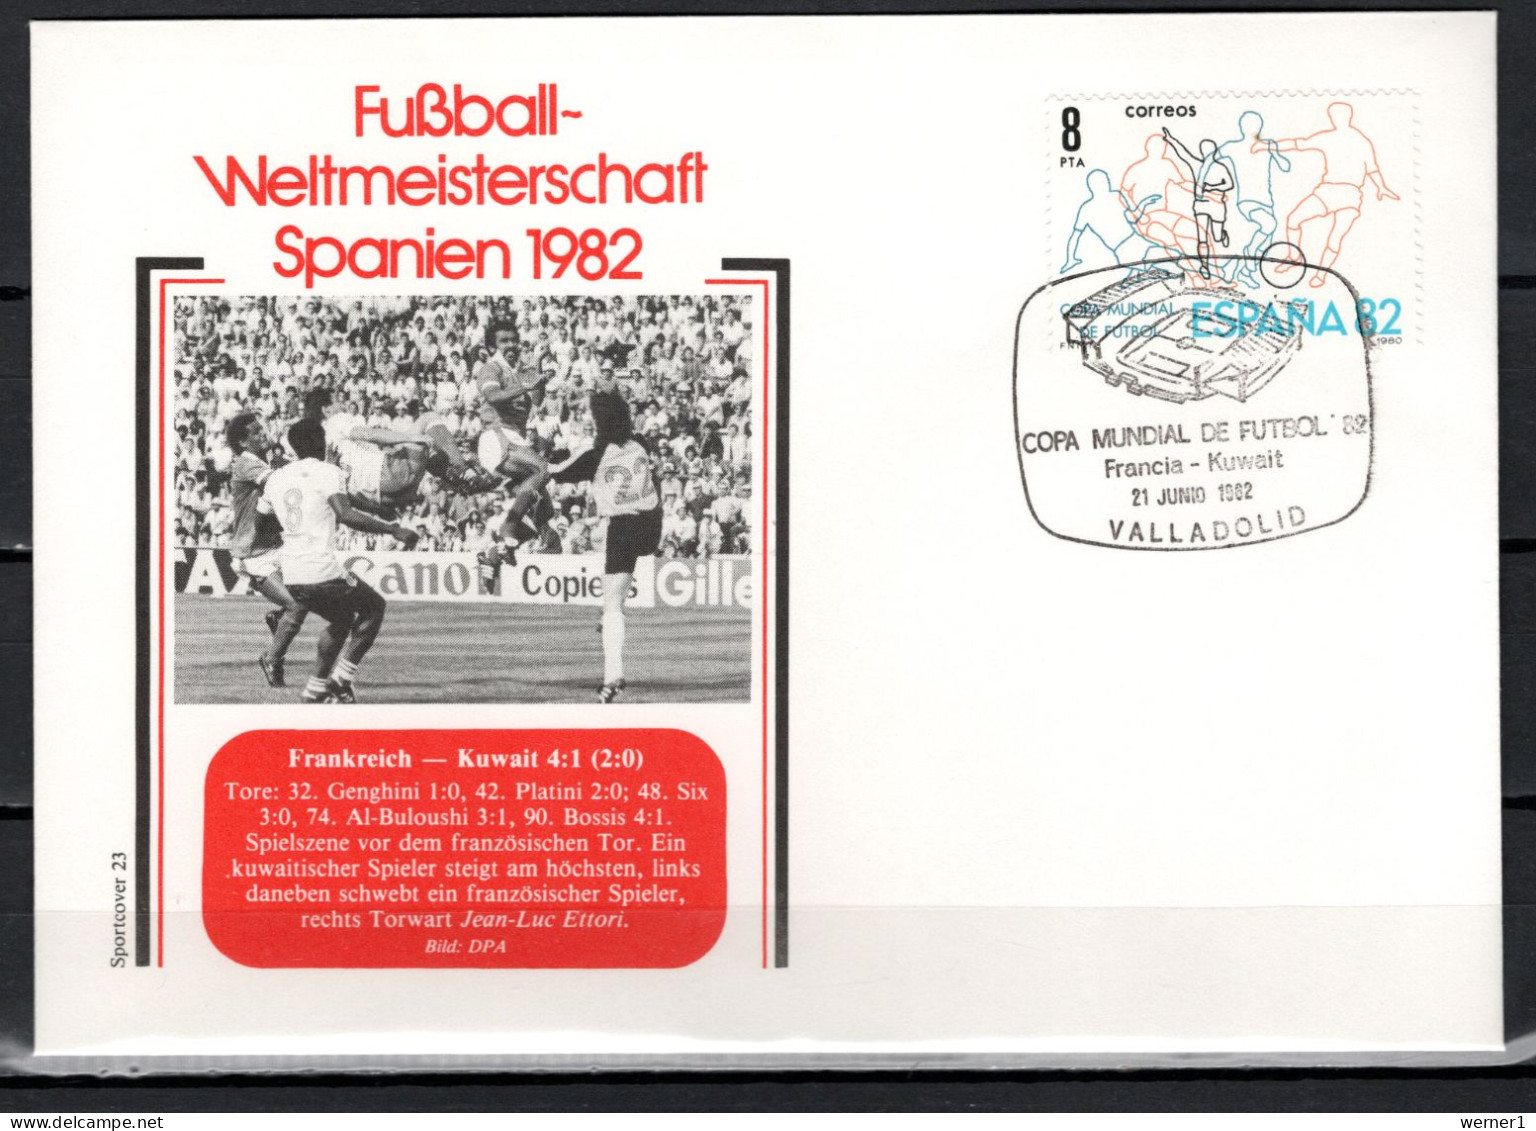 Spain 1982 Football Soccer World Cup Commemorative Cover Match France - Kuwait 4:1 - 1982 – Spain